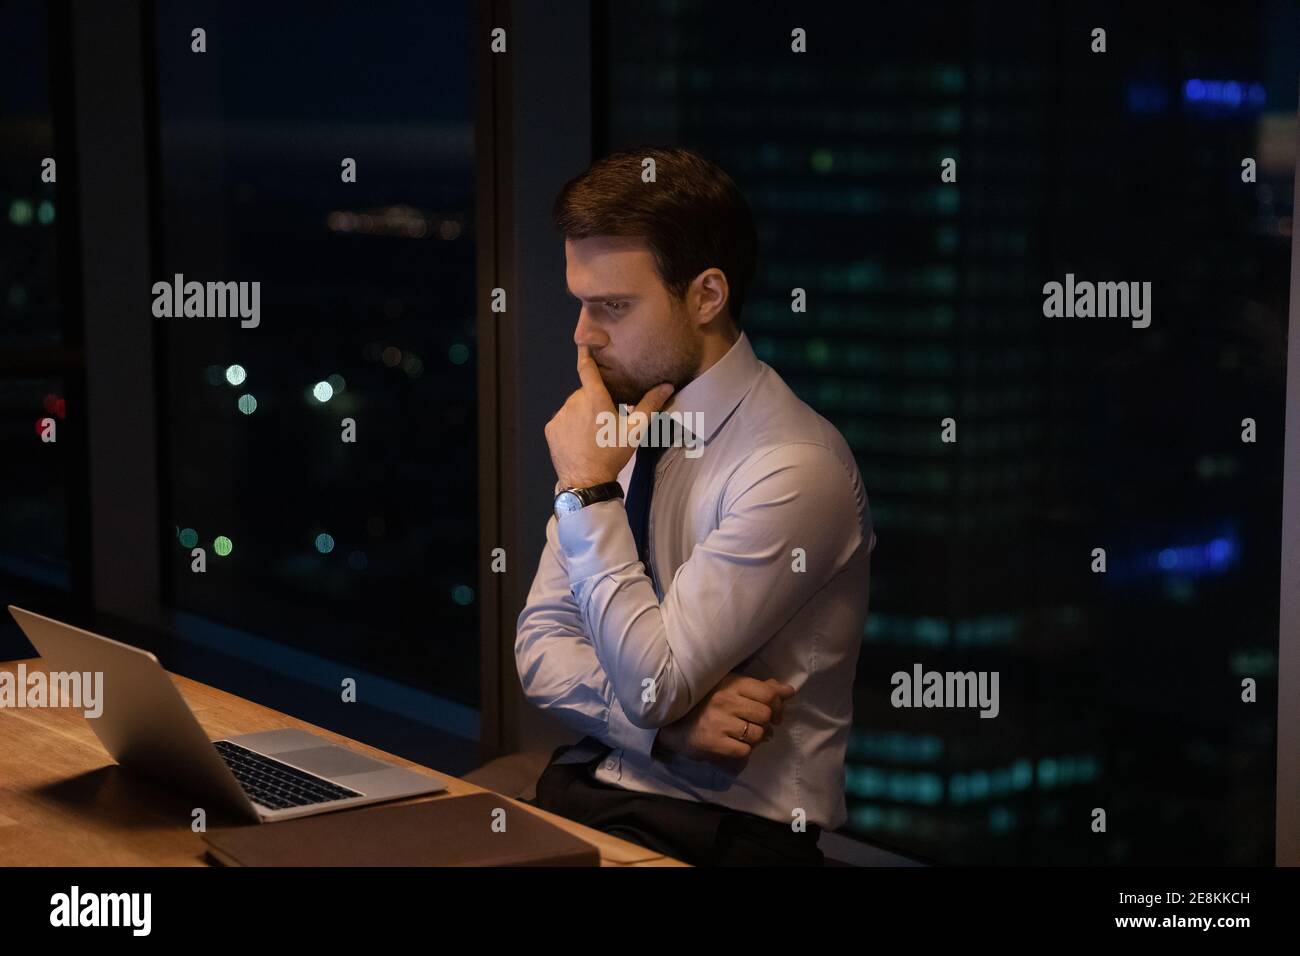 Doubtful businessman ponder by computer hesitate before making risky decision Stock Photo